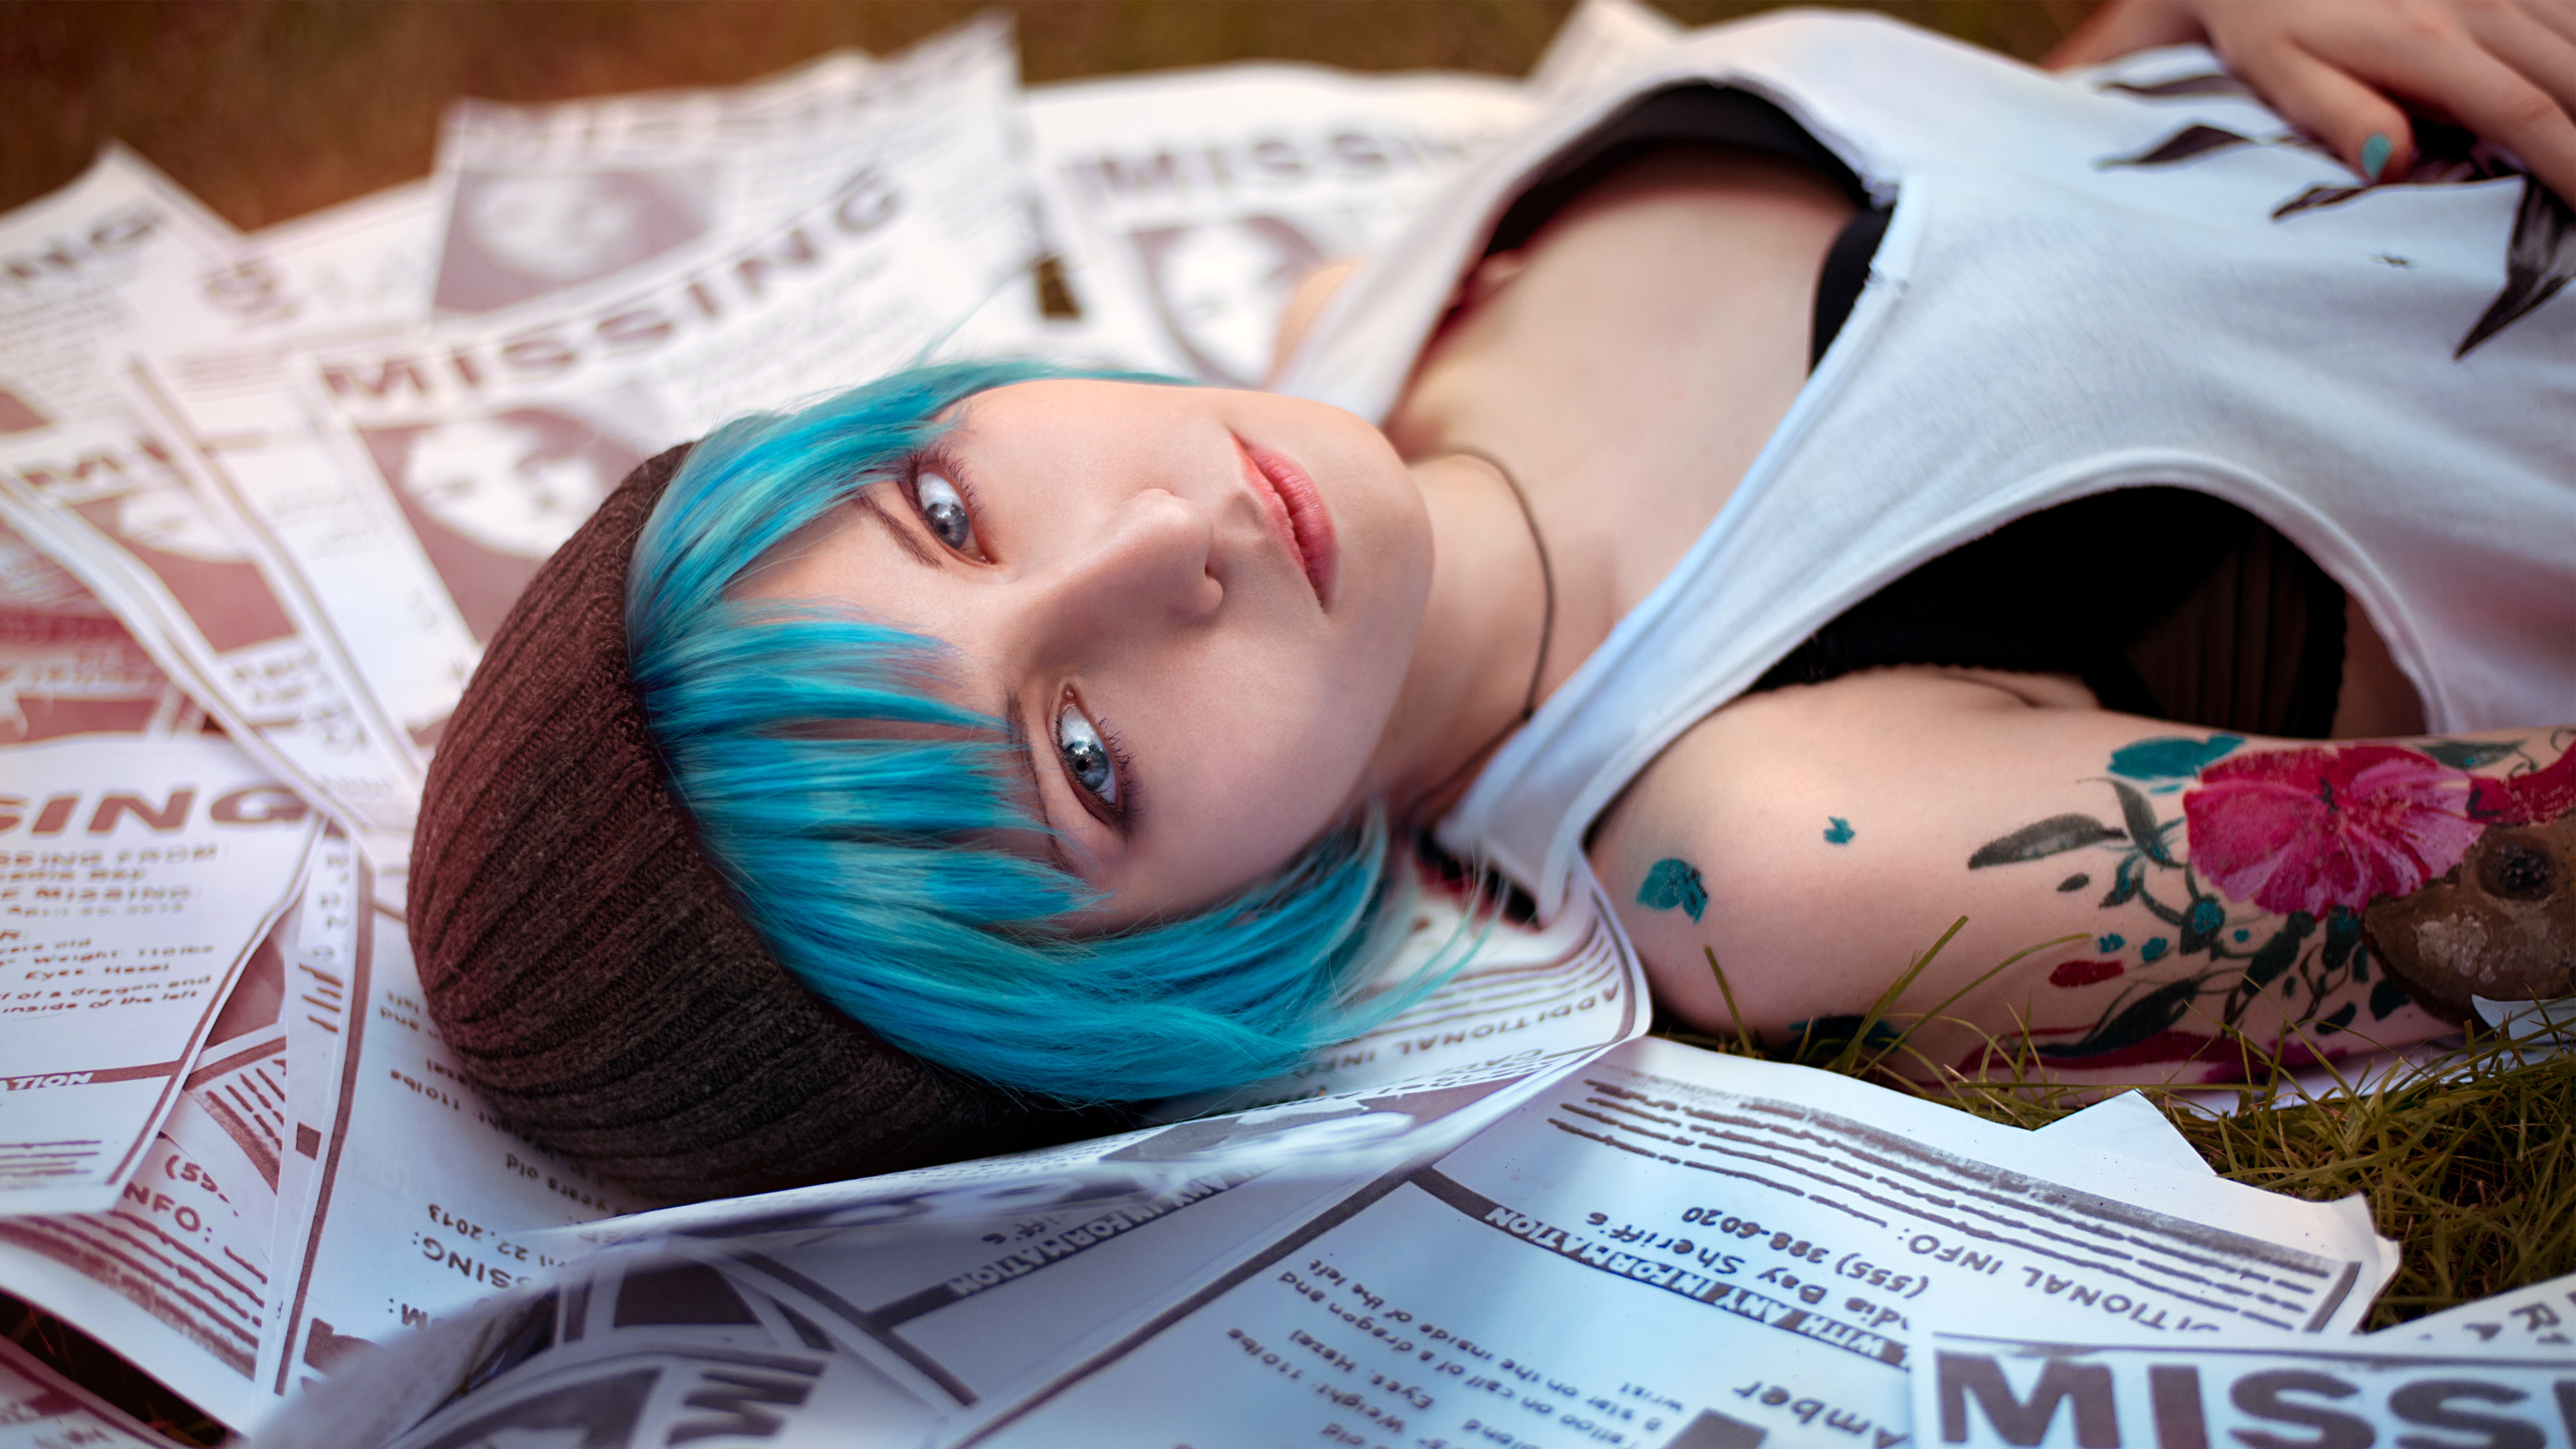 Life Is Strange Max Cosplay Wallpaper - Life Is Strange Chloe Wallpaper Hd - HD Wallpaper 